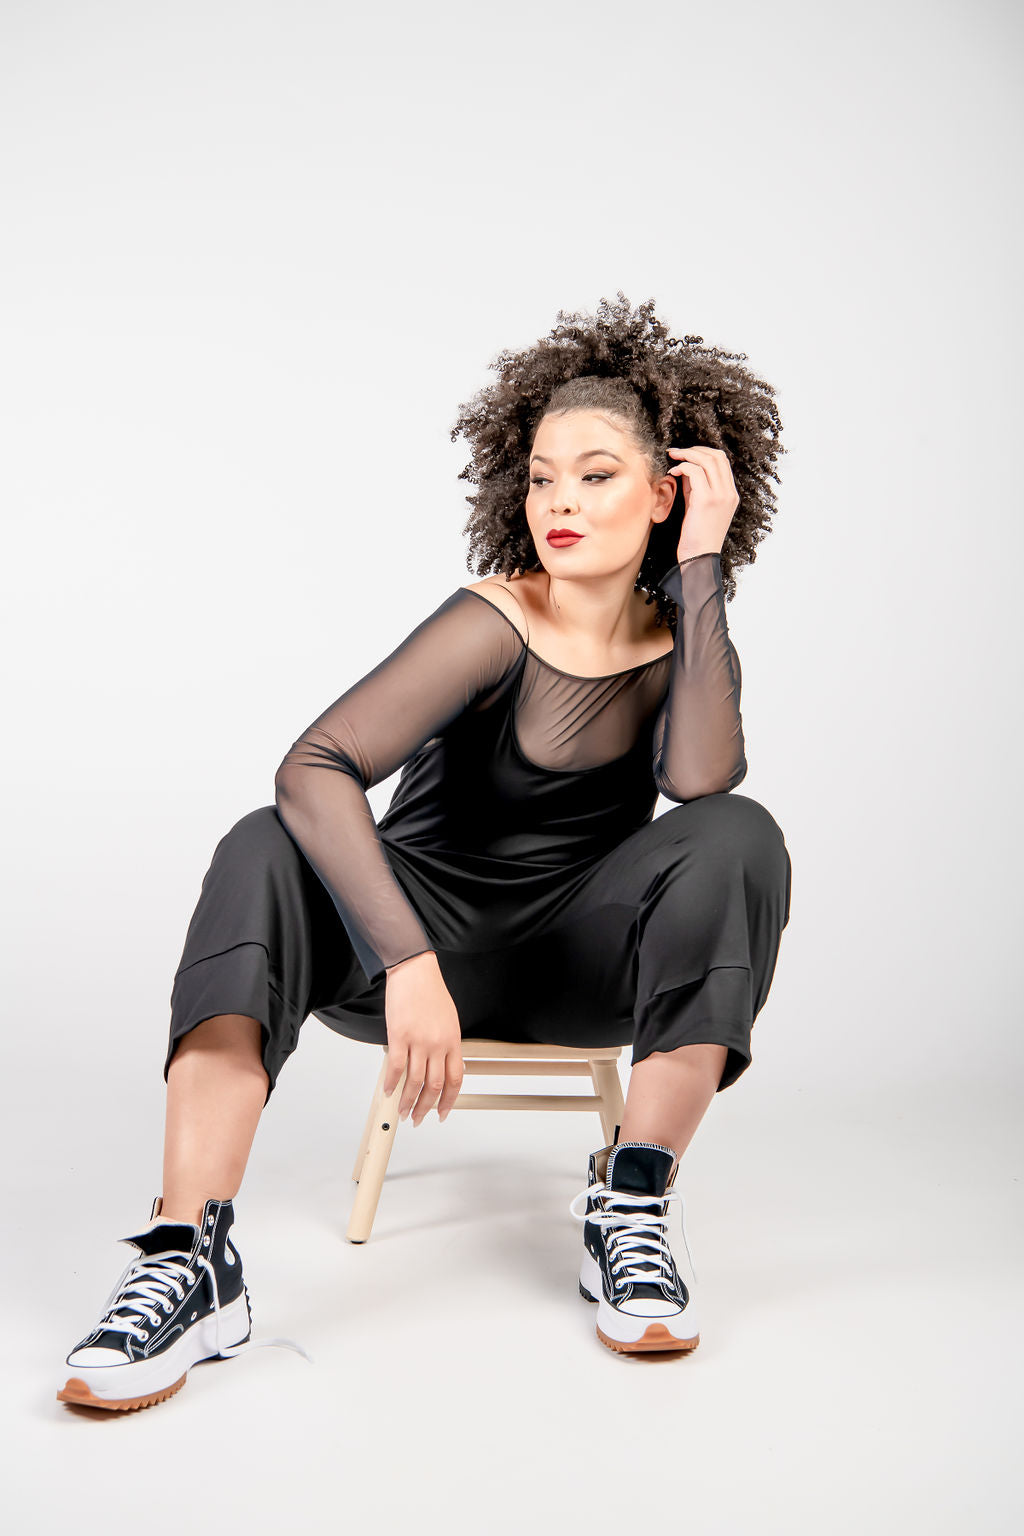 Fashionable young woman with curly hair seated on a stool, wearing a sheer black dress over a black outfit, paired with high-top sneakers